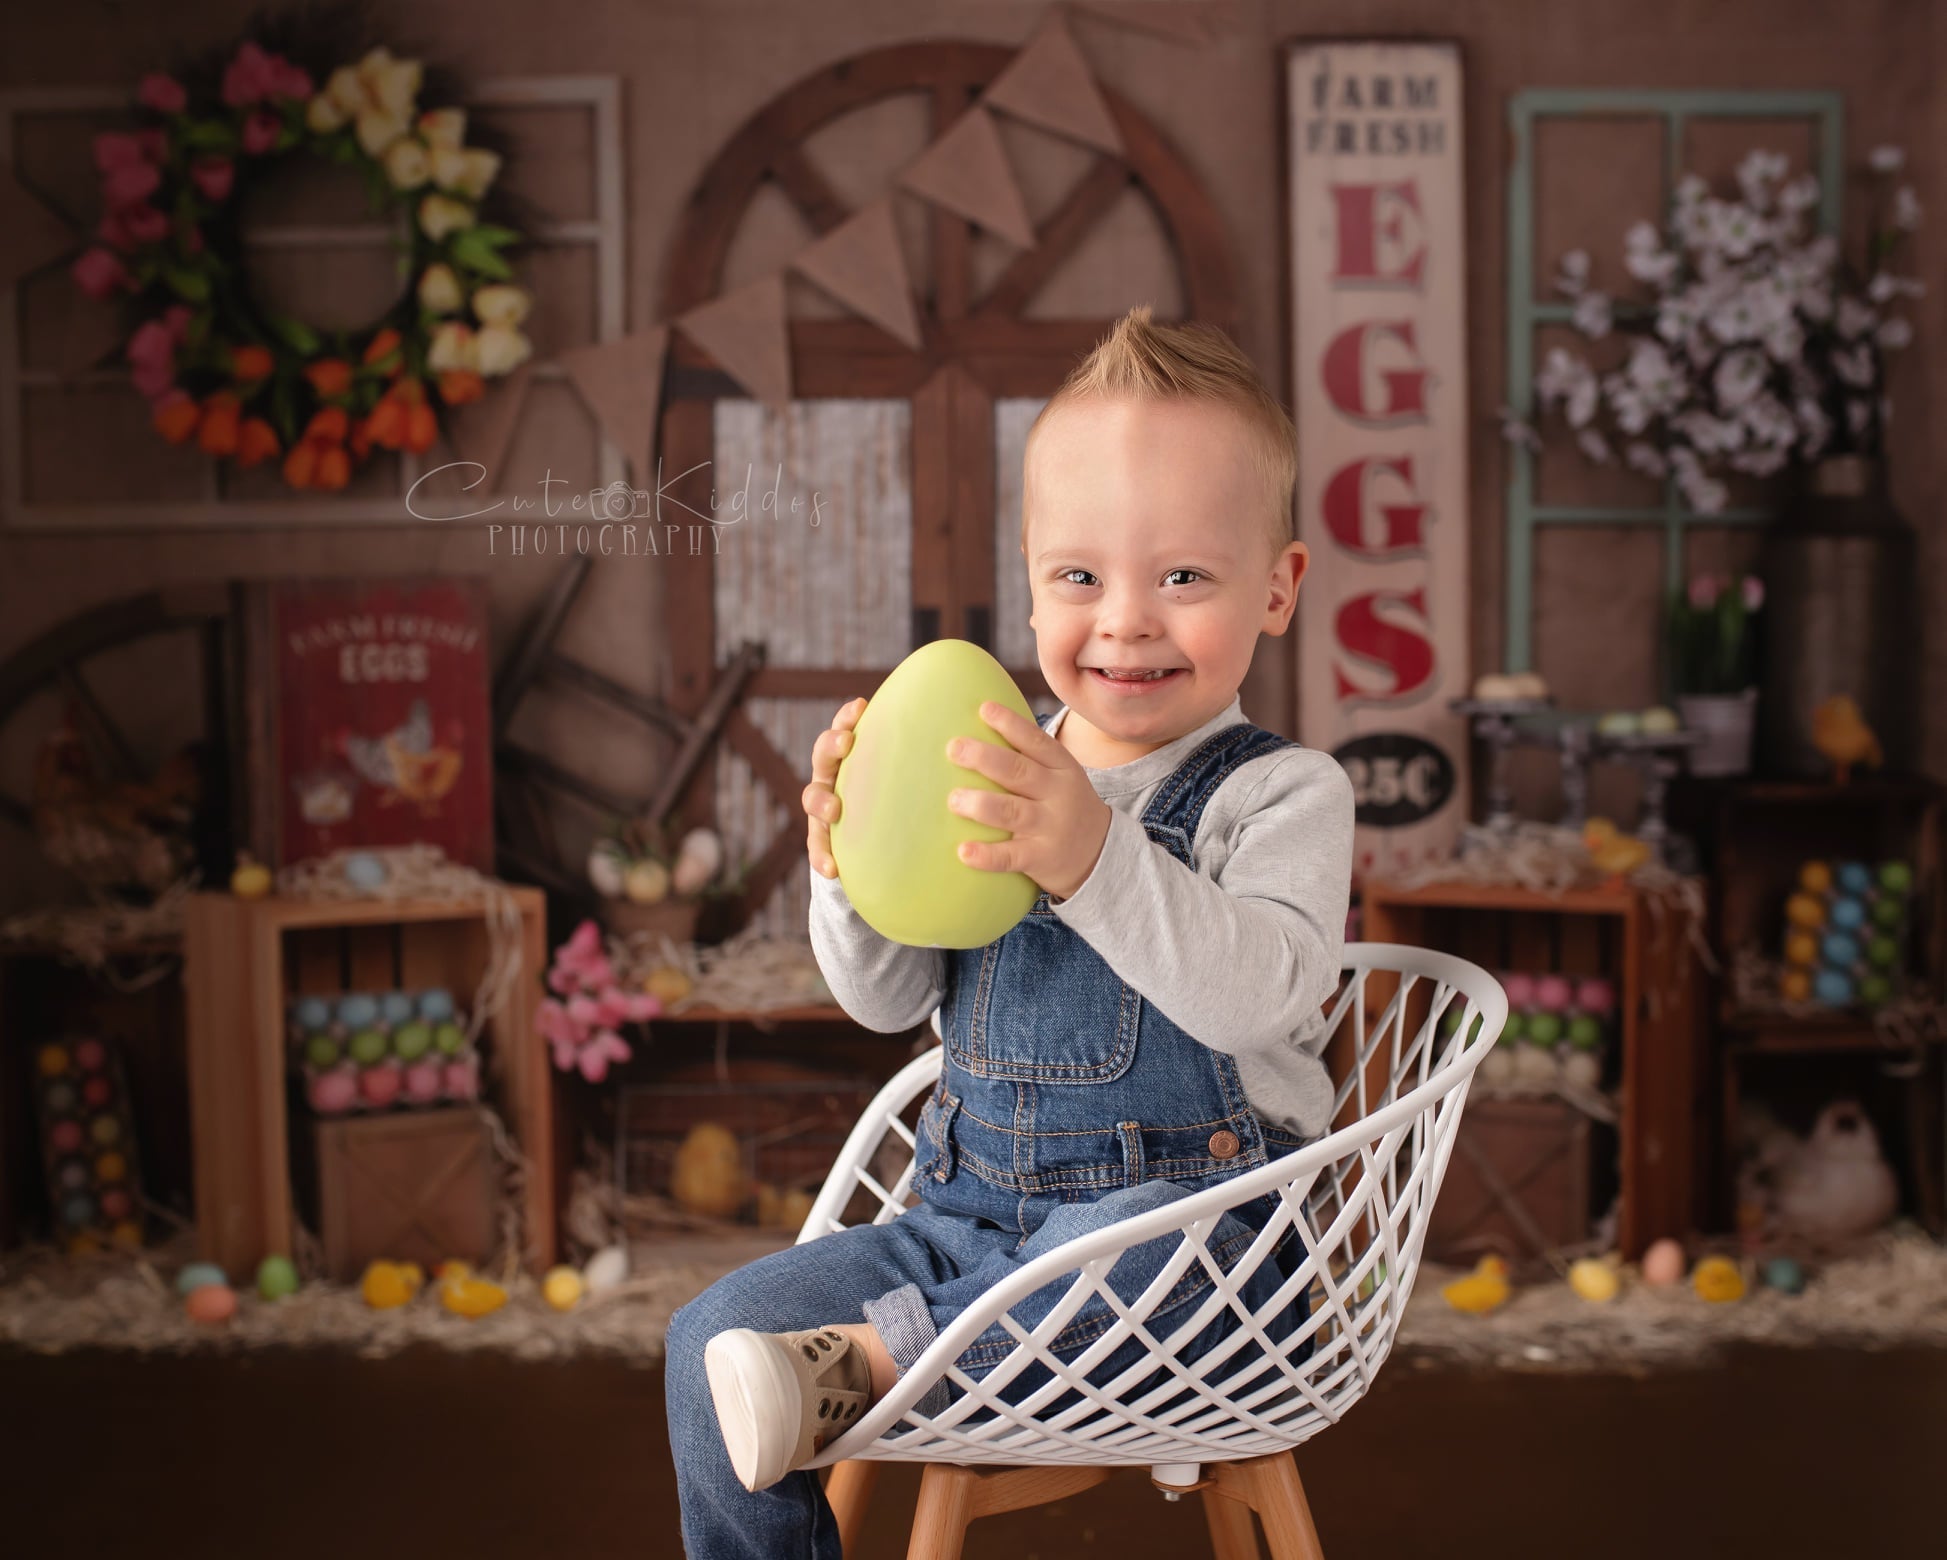 Kate Easter Colorful Egg Barn Door Backdrop for Photography (only ship to Canada)